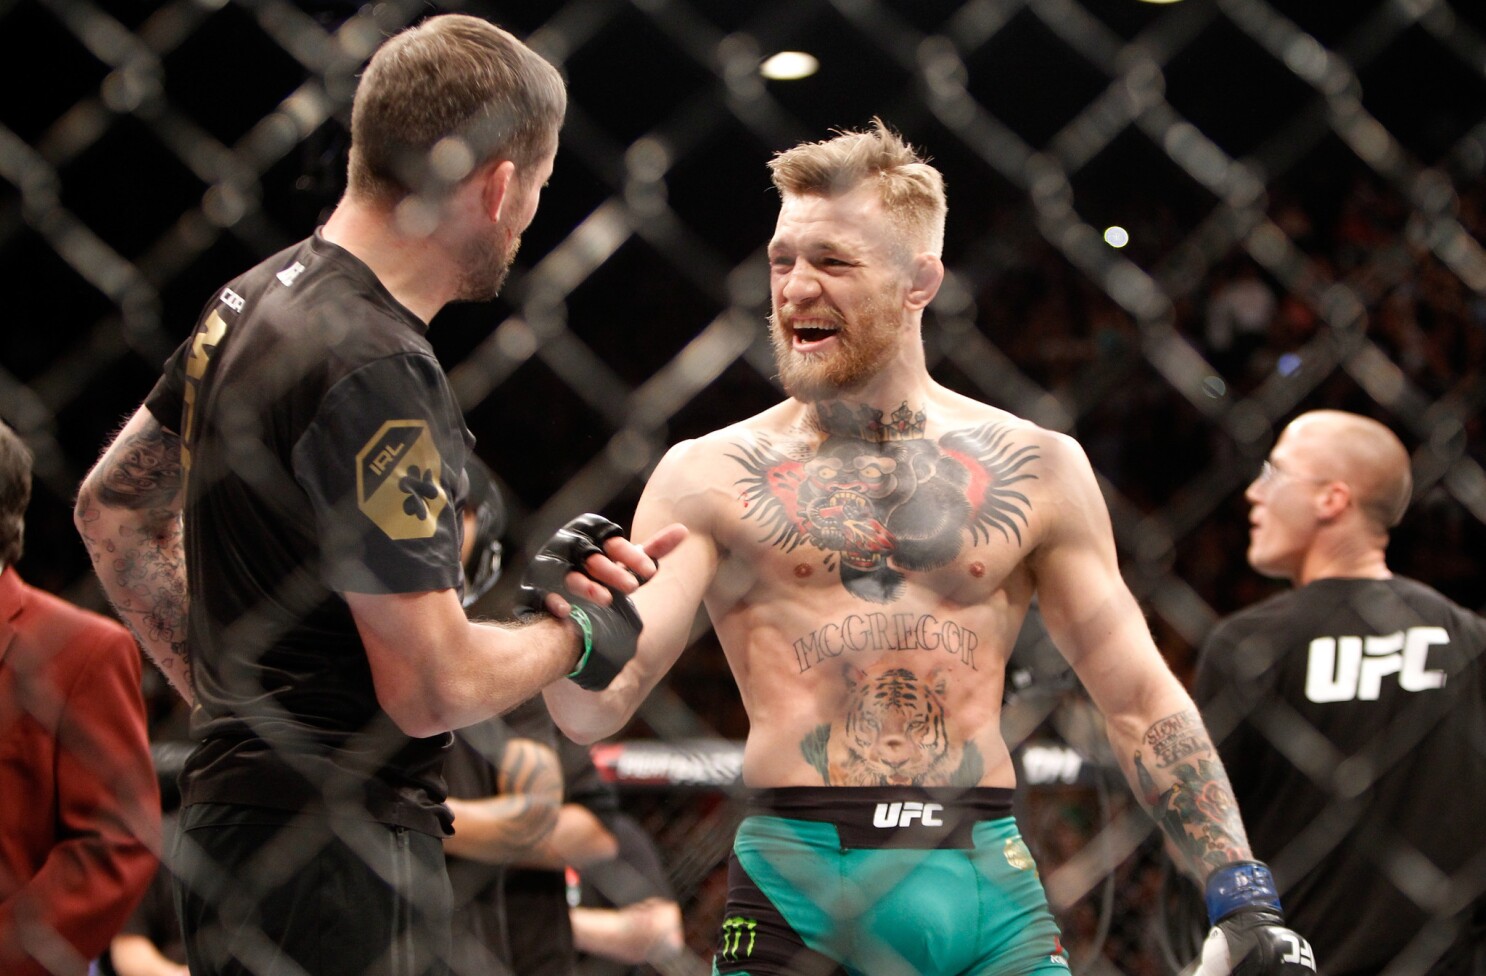 Conor McGregor has options in next fight after record knockout of Aldo Los Times